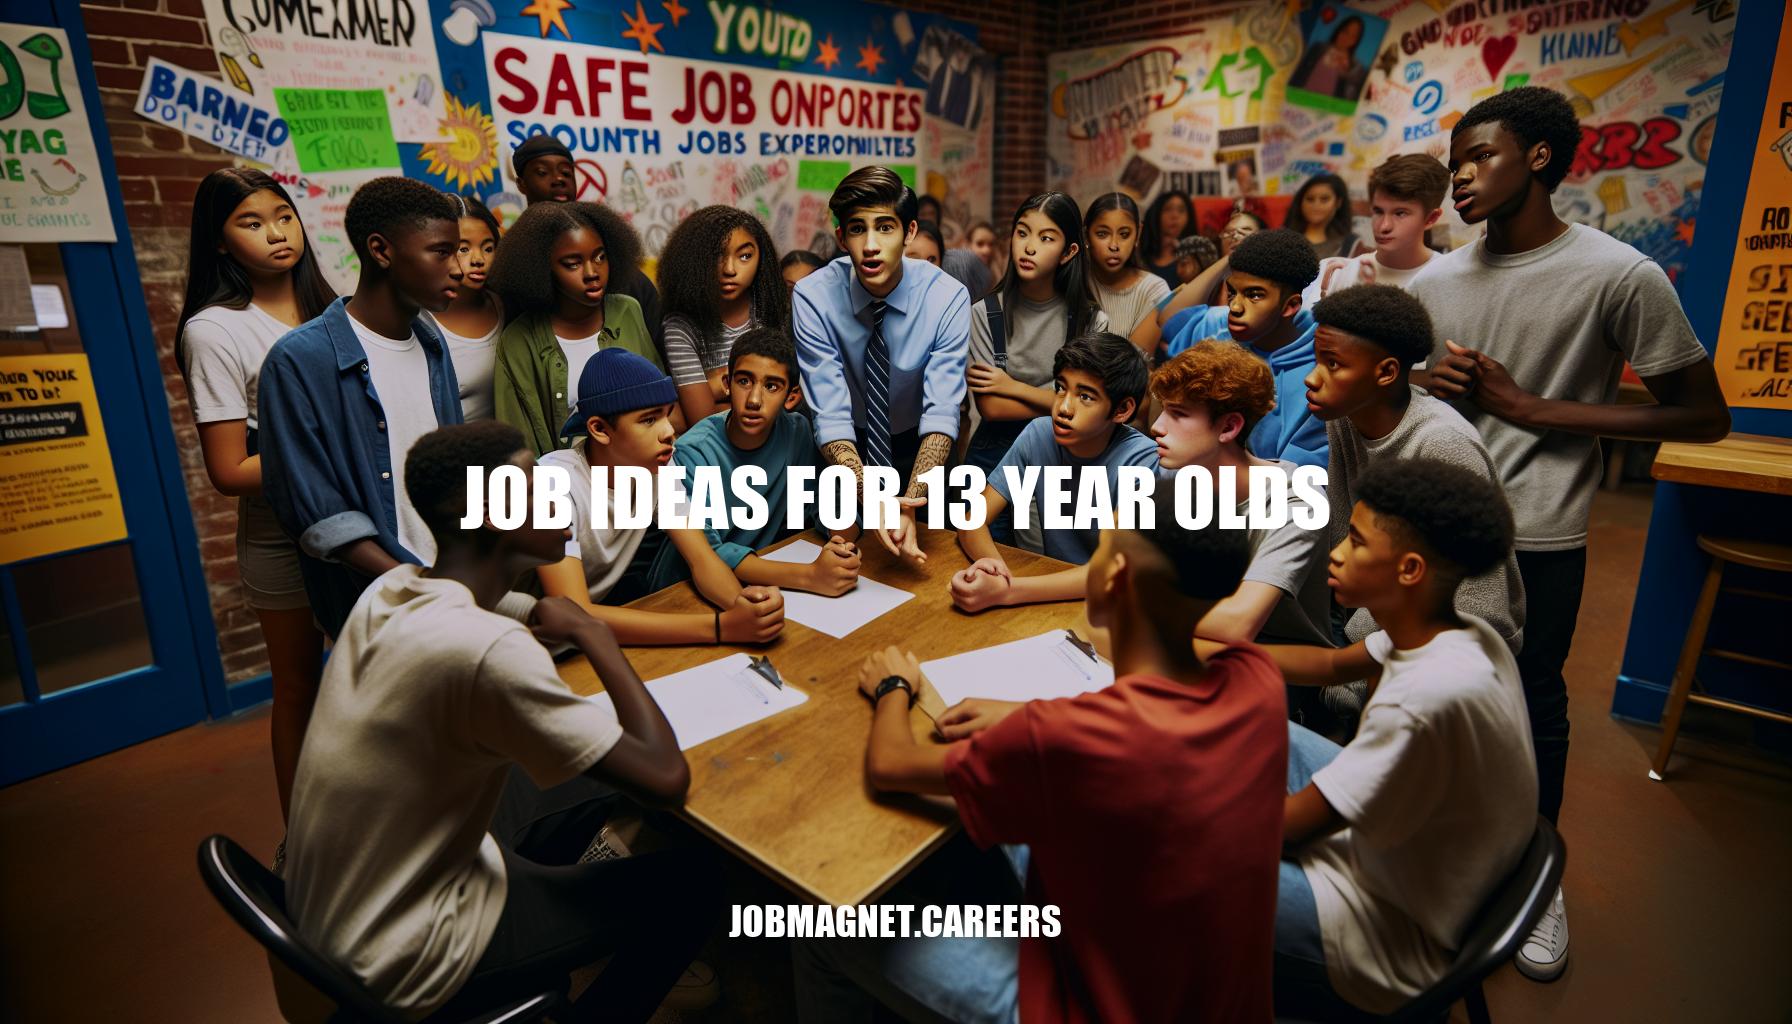 Top Job Ideas for 13 Year Olds: Finding Safe Work Opportunities